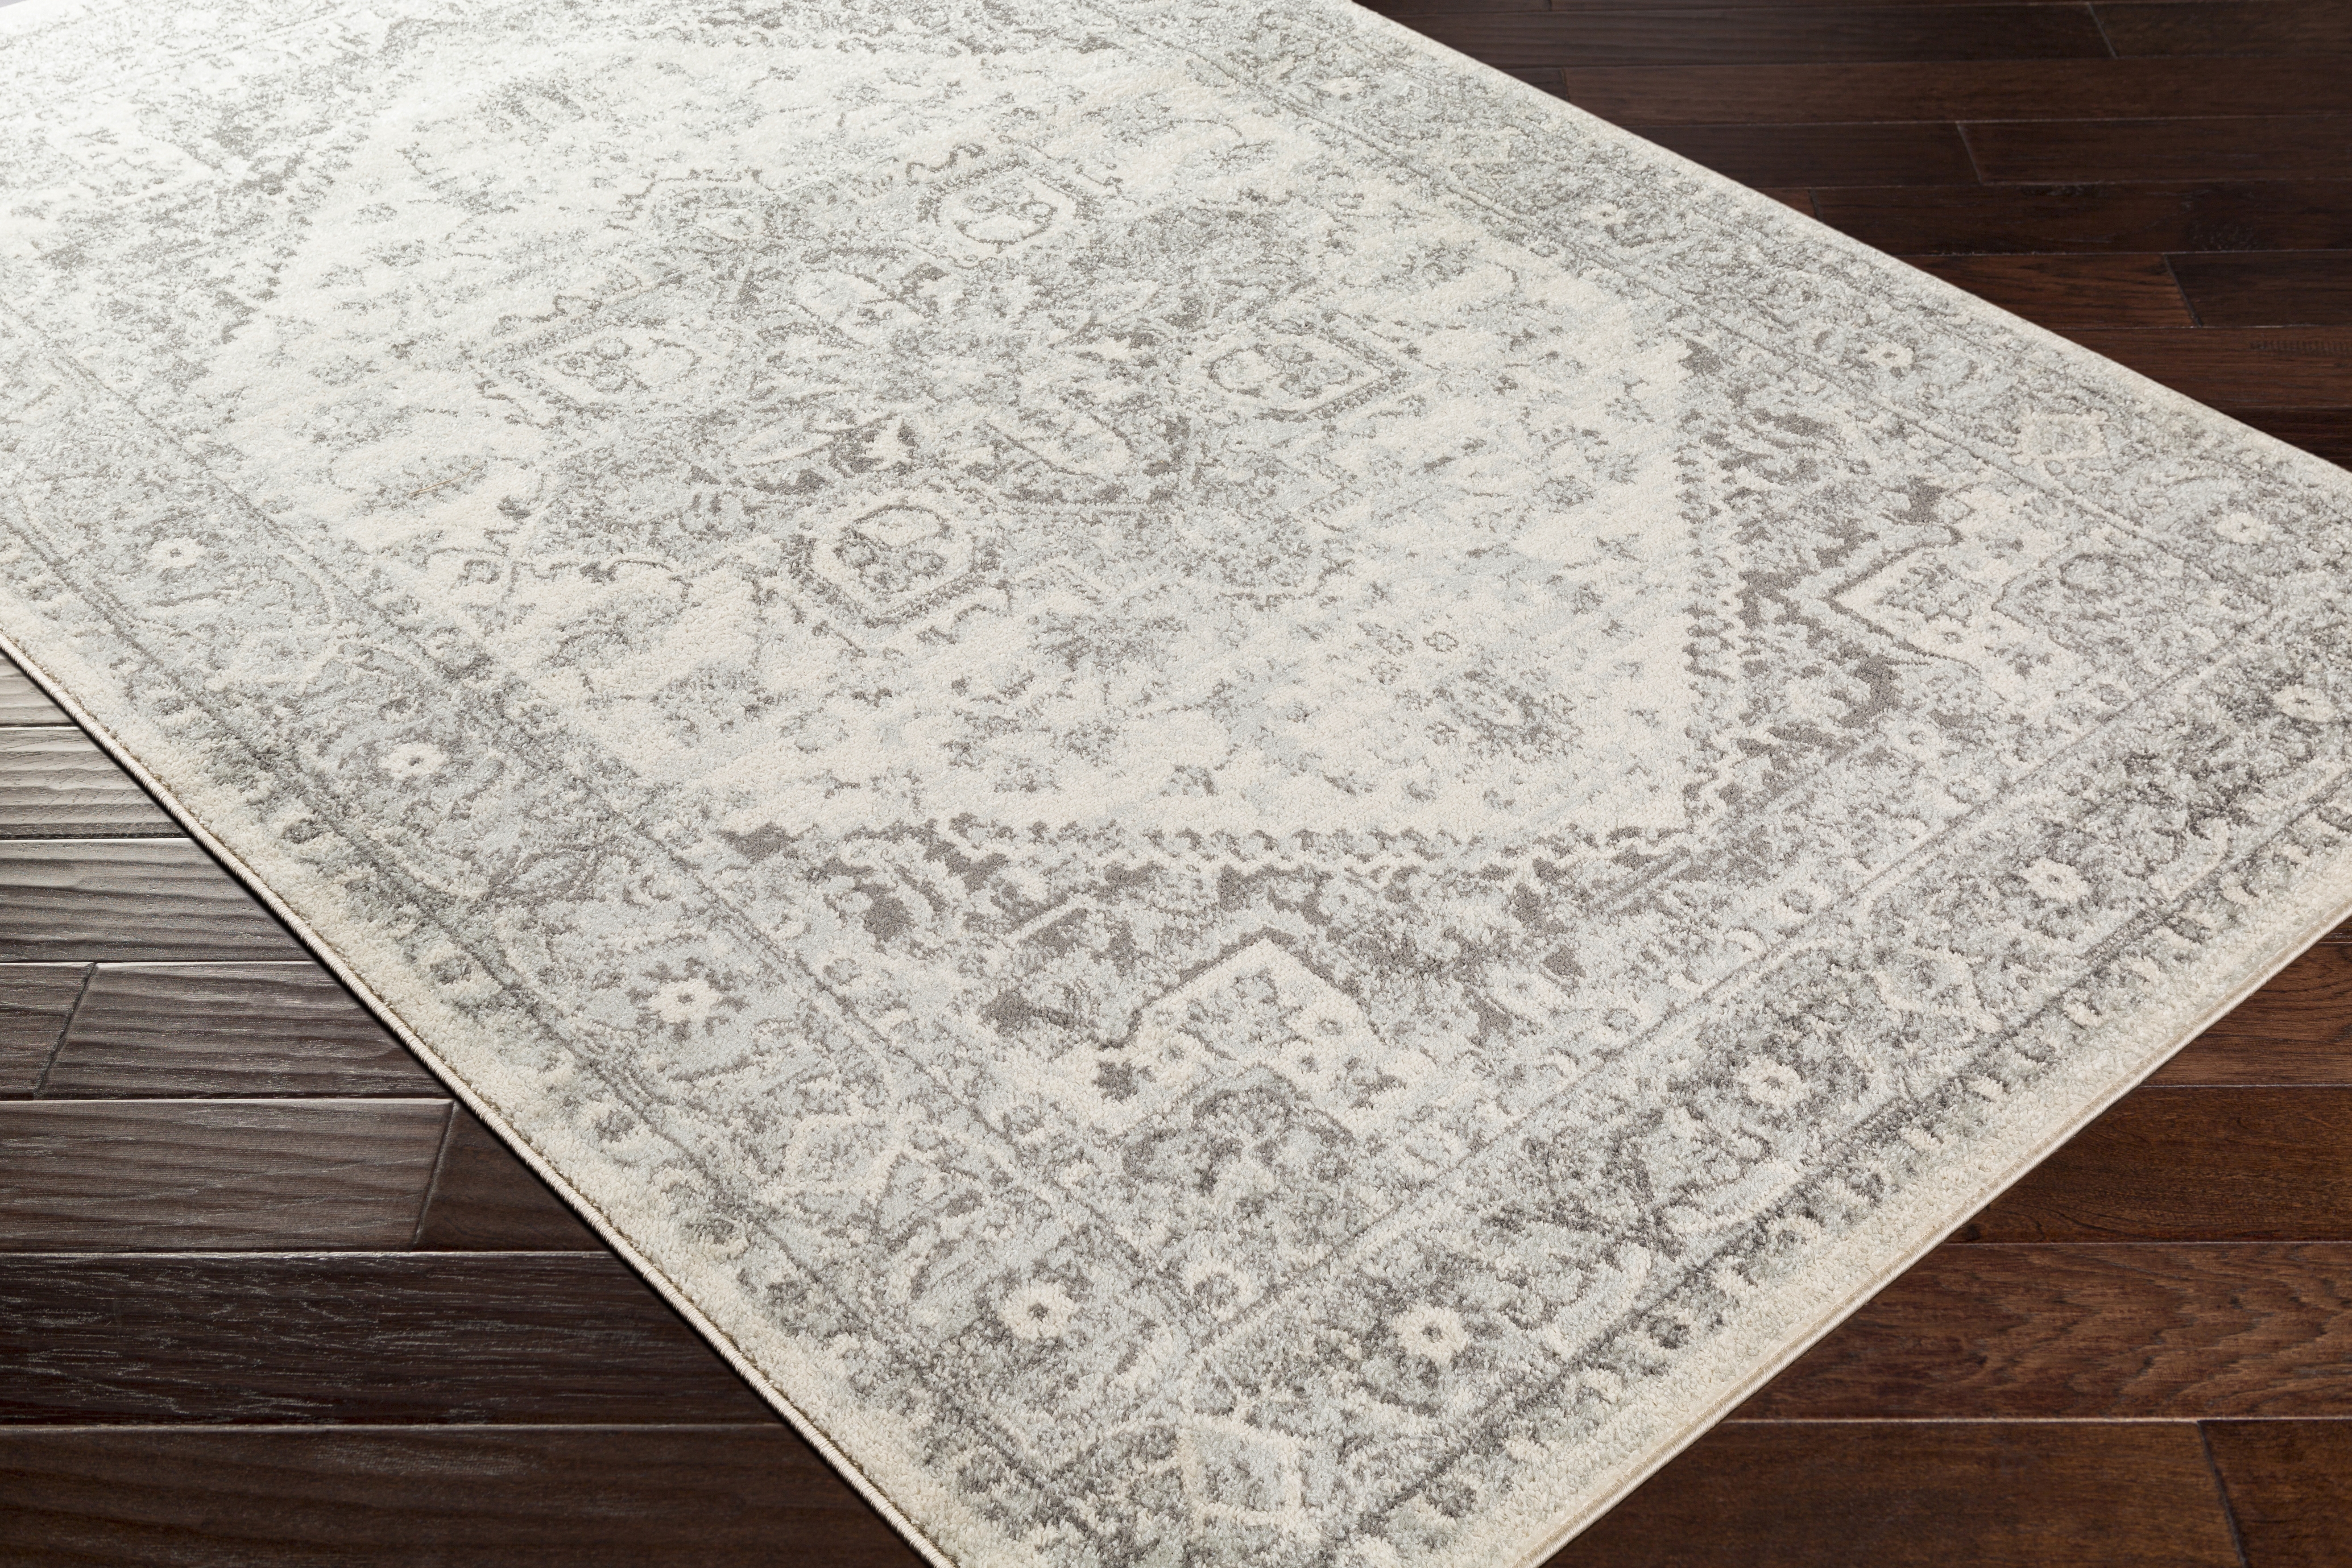 Chester Rug, 8'10" x 12' - Image 3